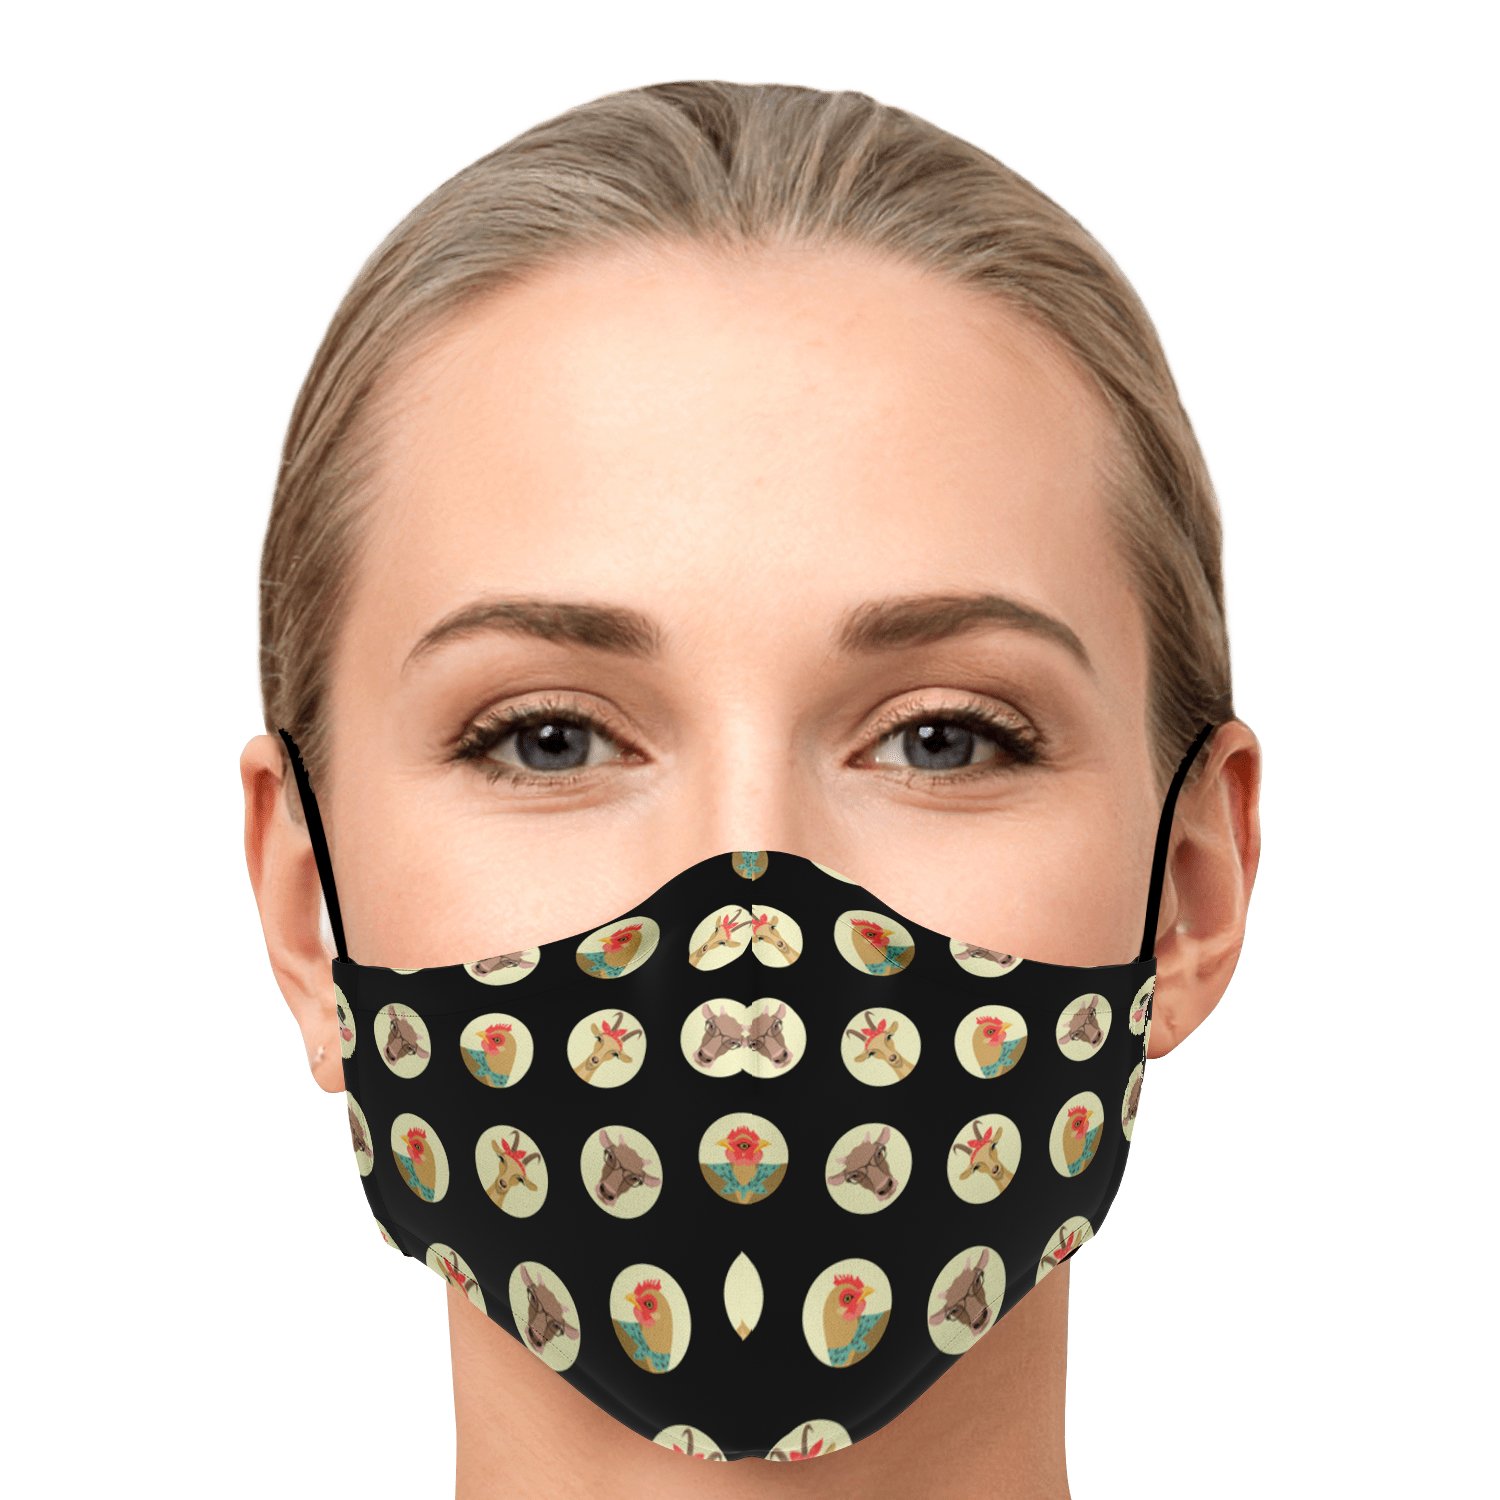 Farm Animals Facemask With 2 PM2.5 Filters CL1211 1pc - Adult Fashion Face Mask / No additional filters Official COW PRINT Merch